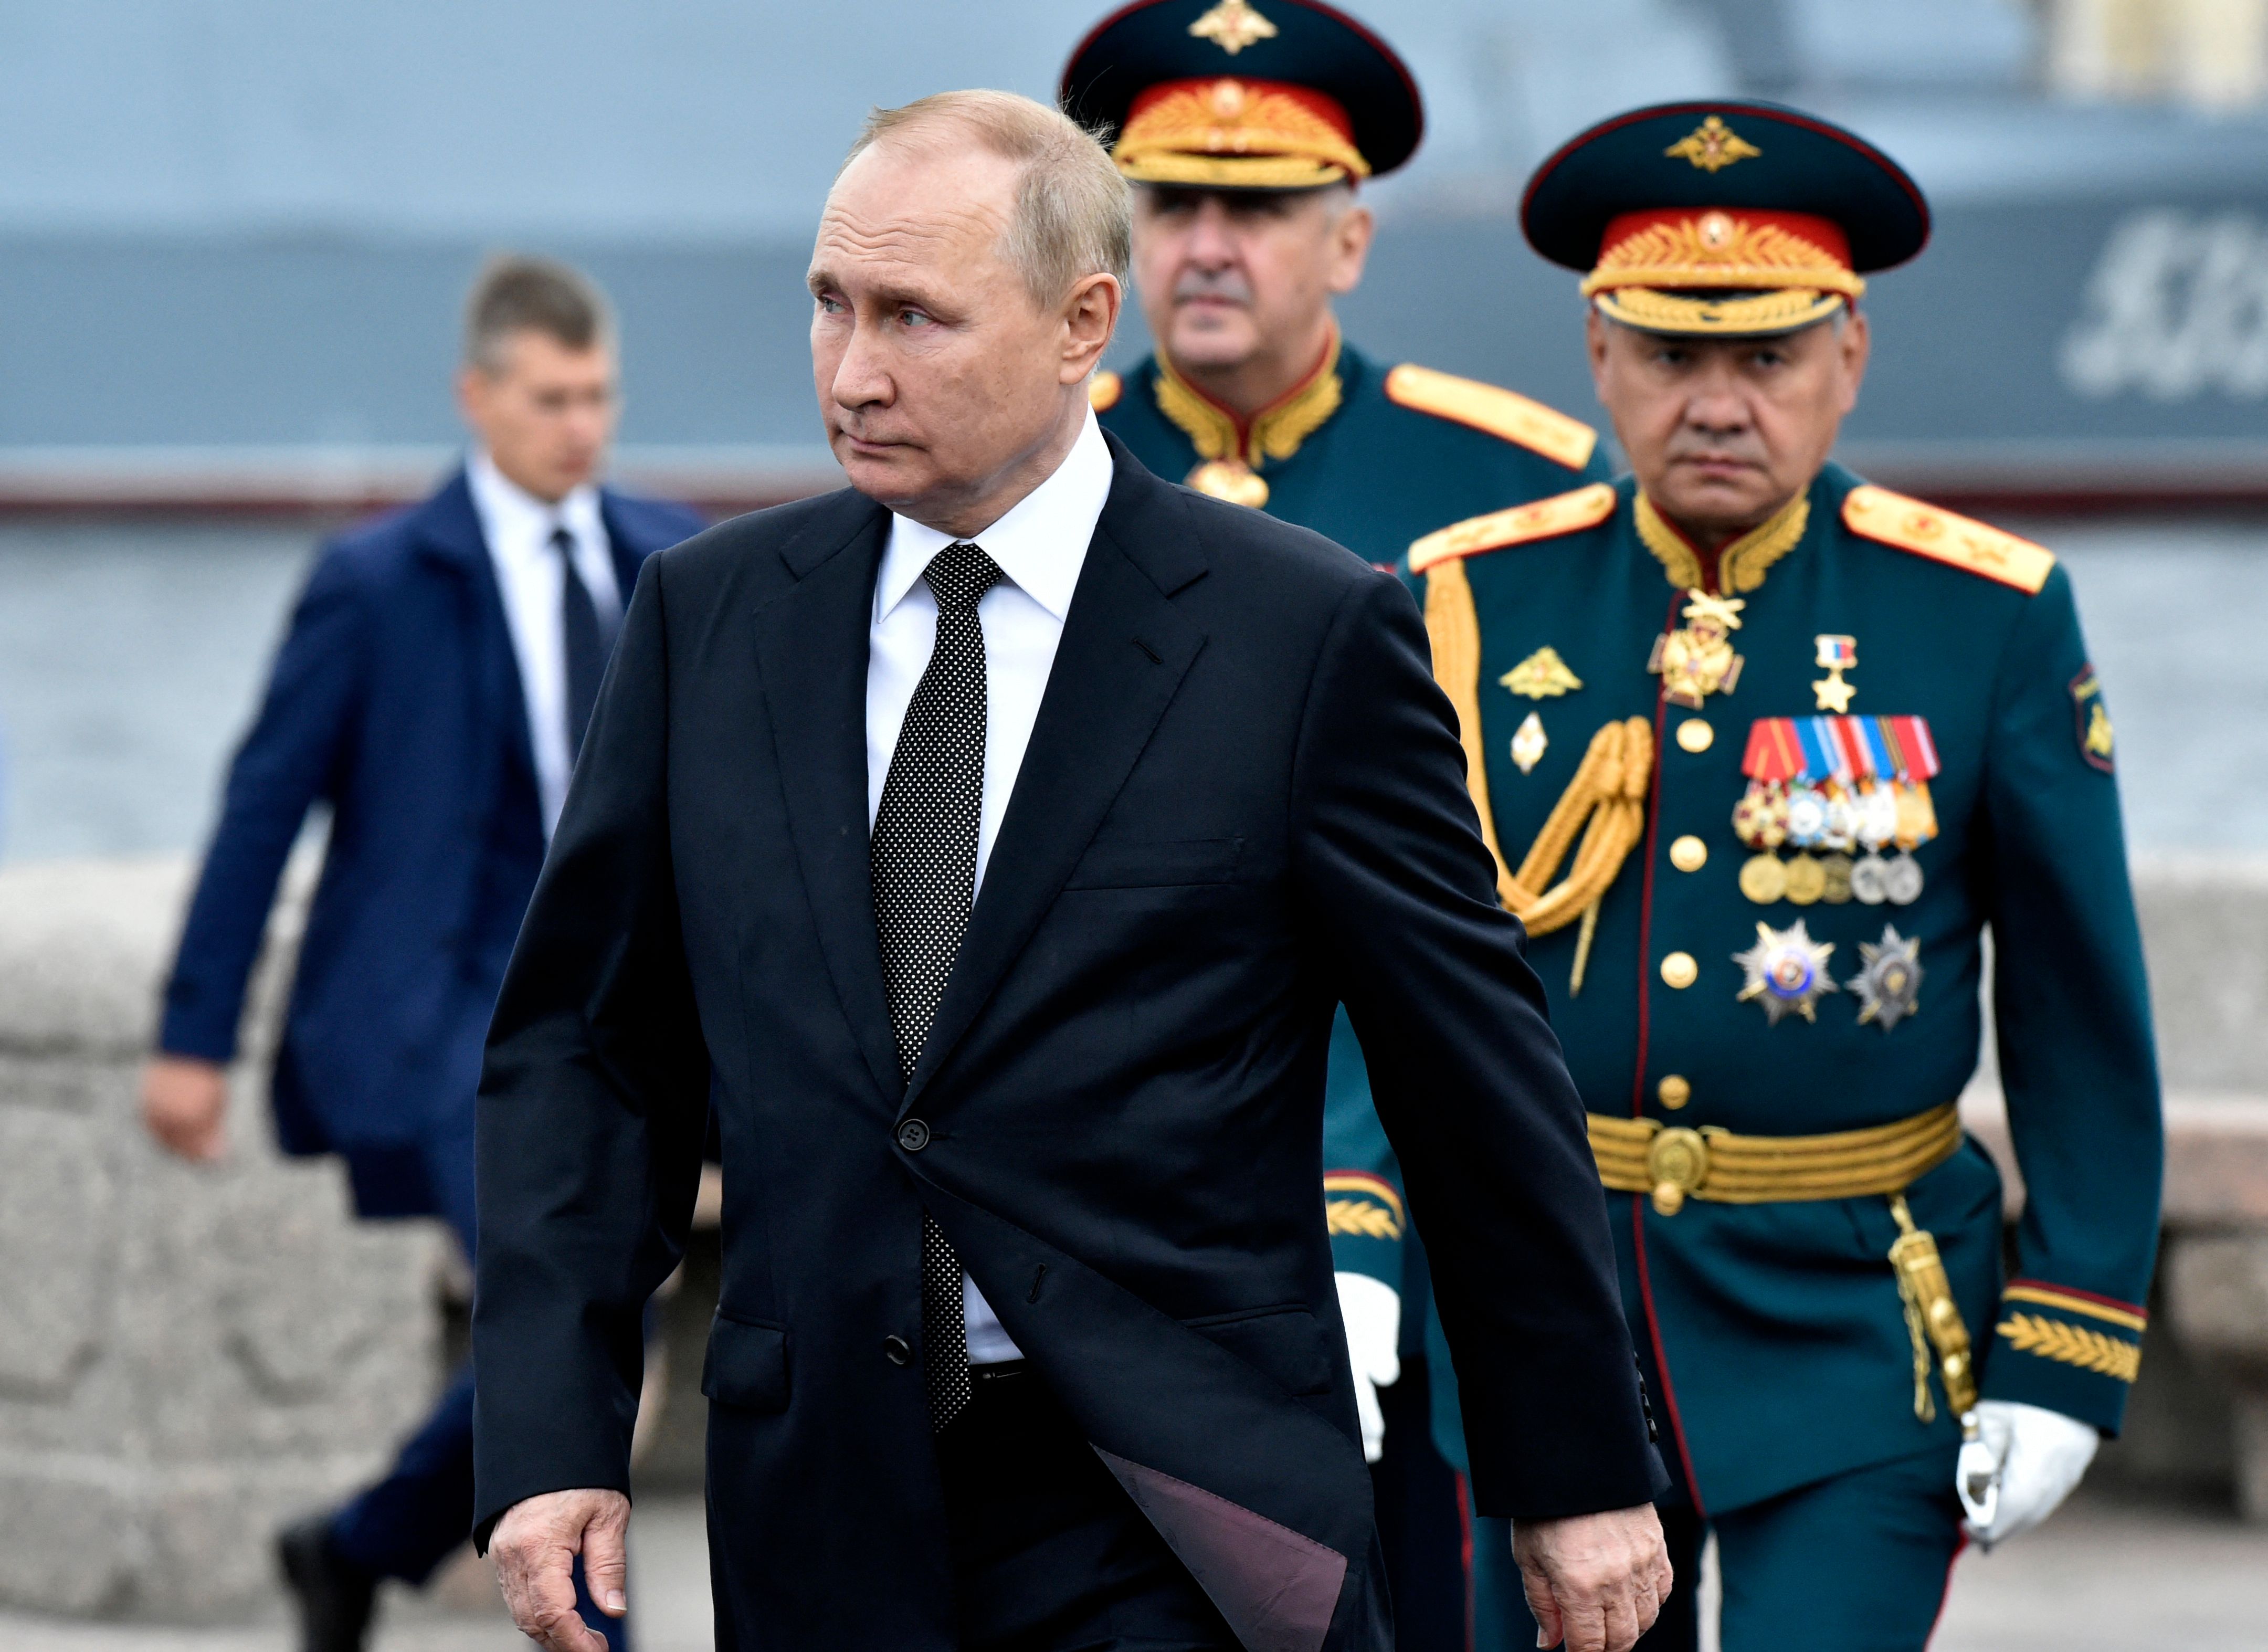 Putin Re-Election: How He Became Longest-Serving Russian Ruler Since Stalin - Bloomberg